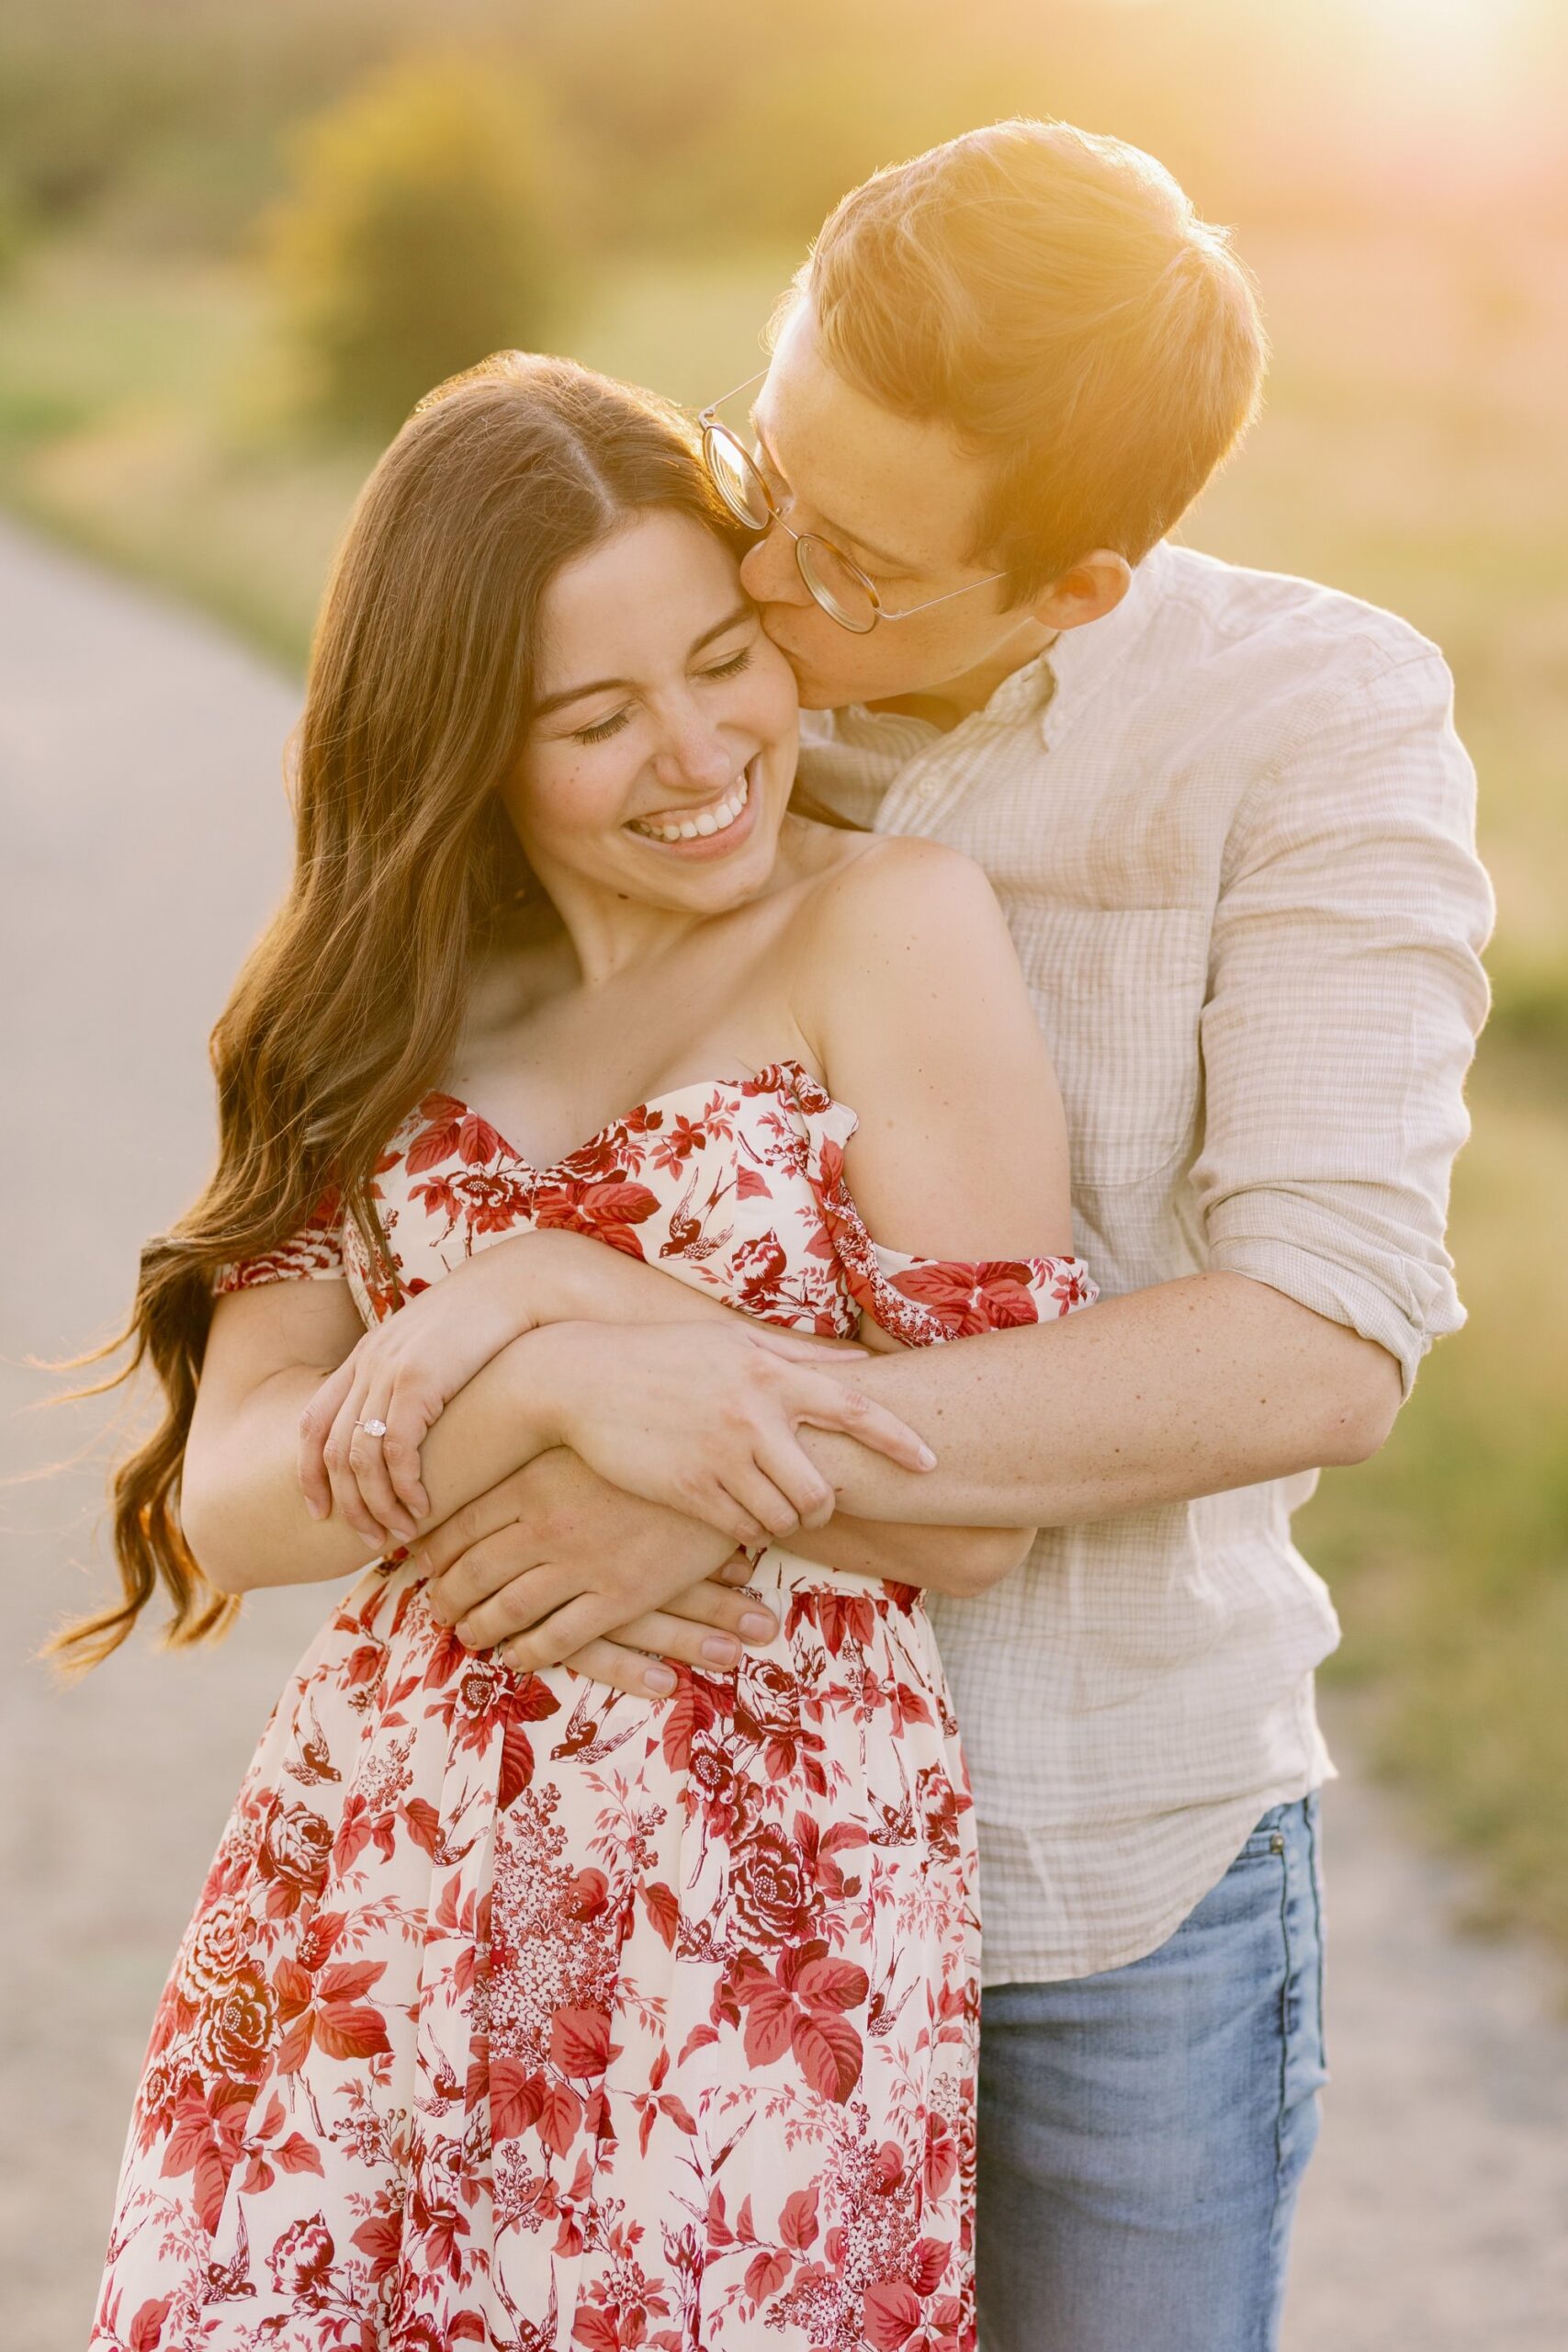 A man embracing his partner from behind and kissing her cheek, both smiling in the warm golden hour light.